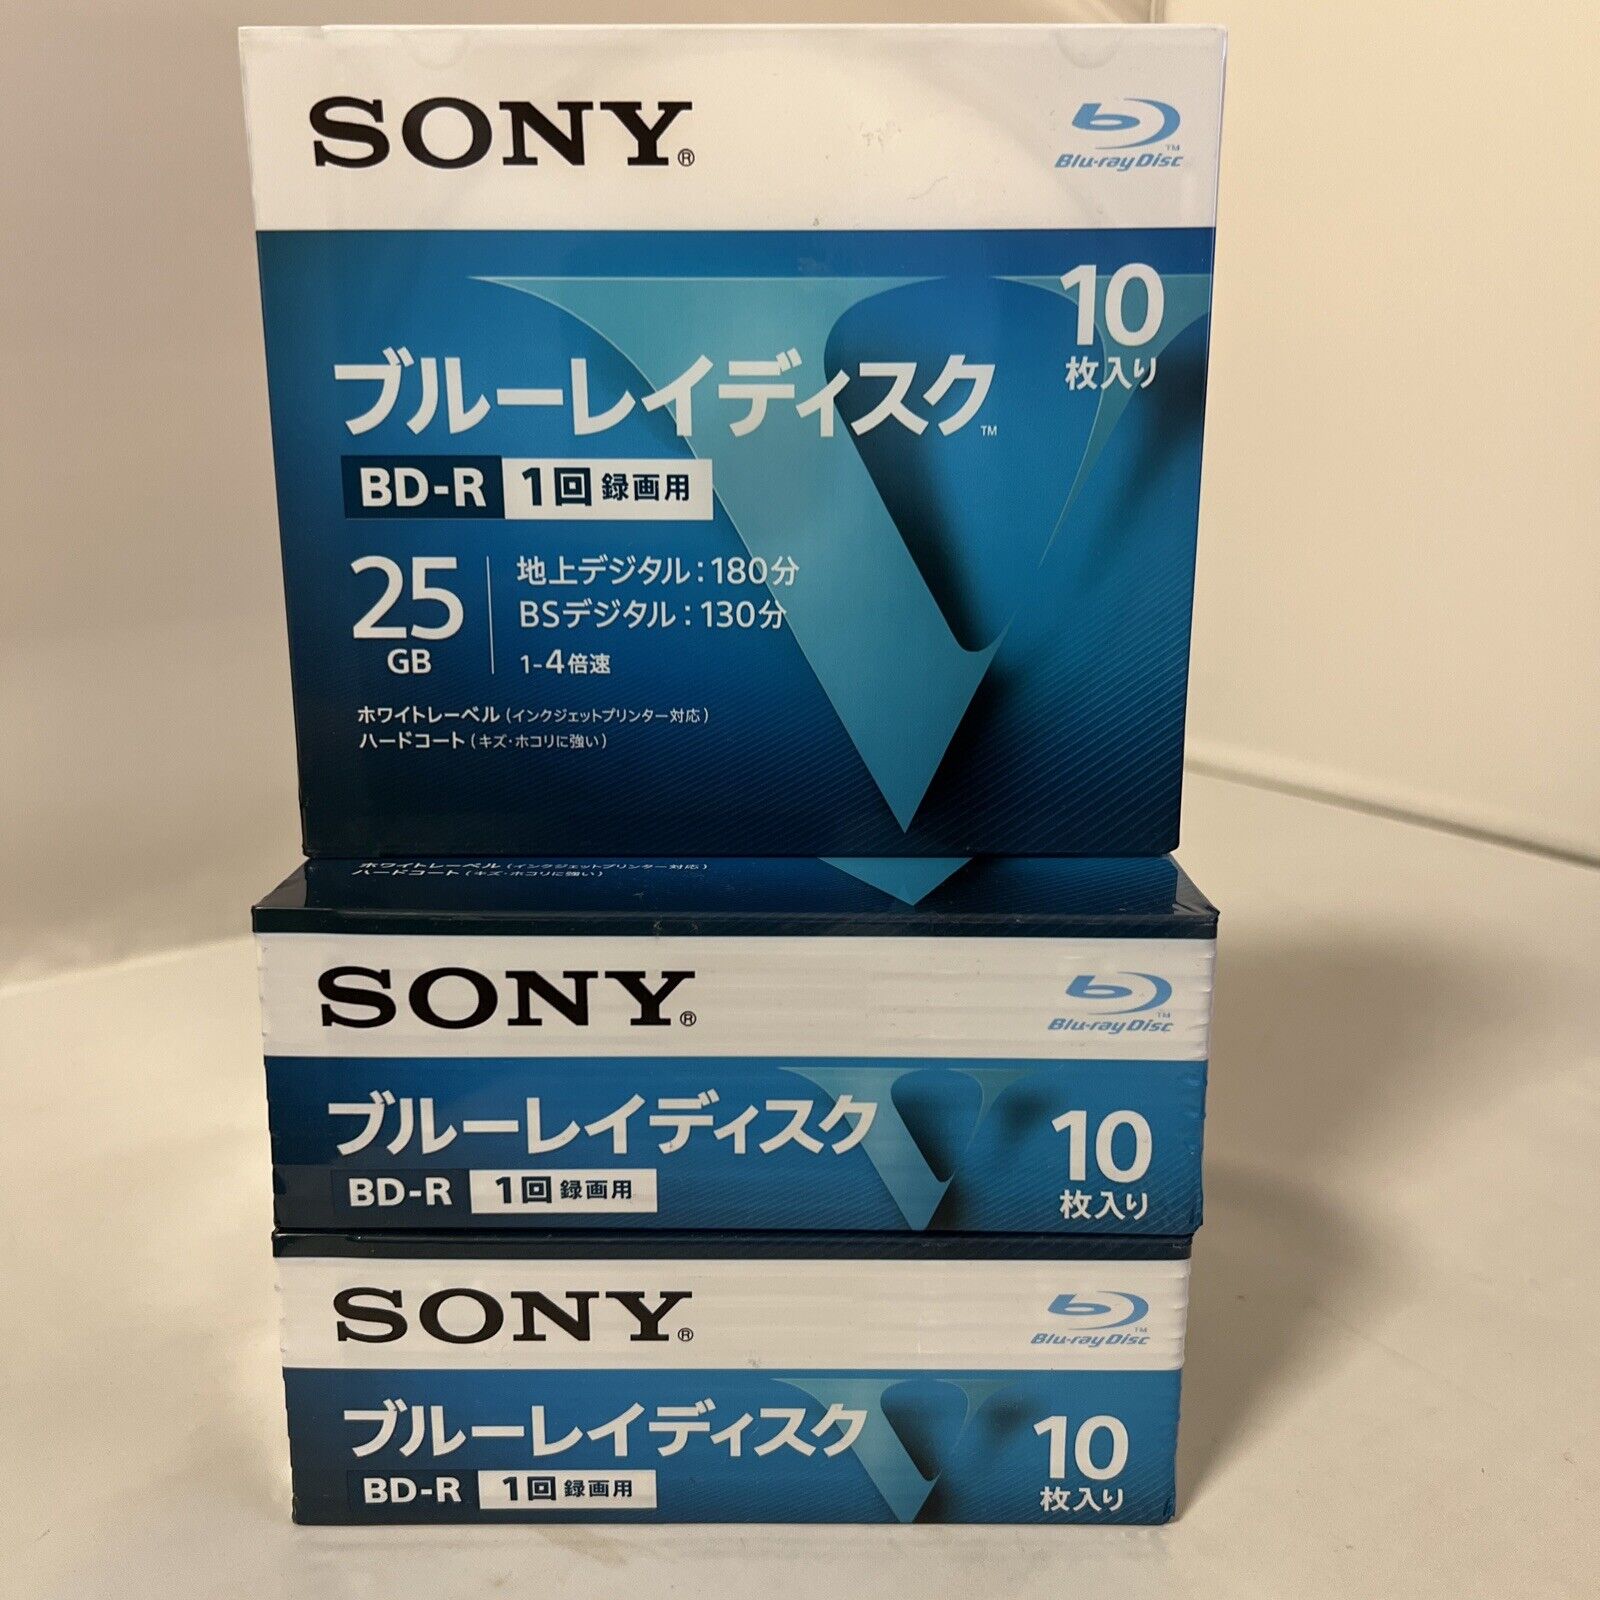 Sony Bluray Disc Recordable - BDR 25GB Blank Data -Lot Of 3 - 10 Disc Per Pack